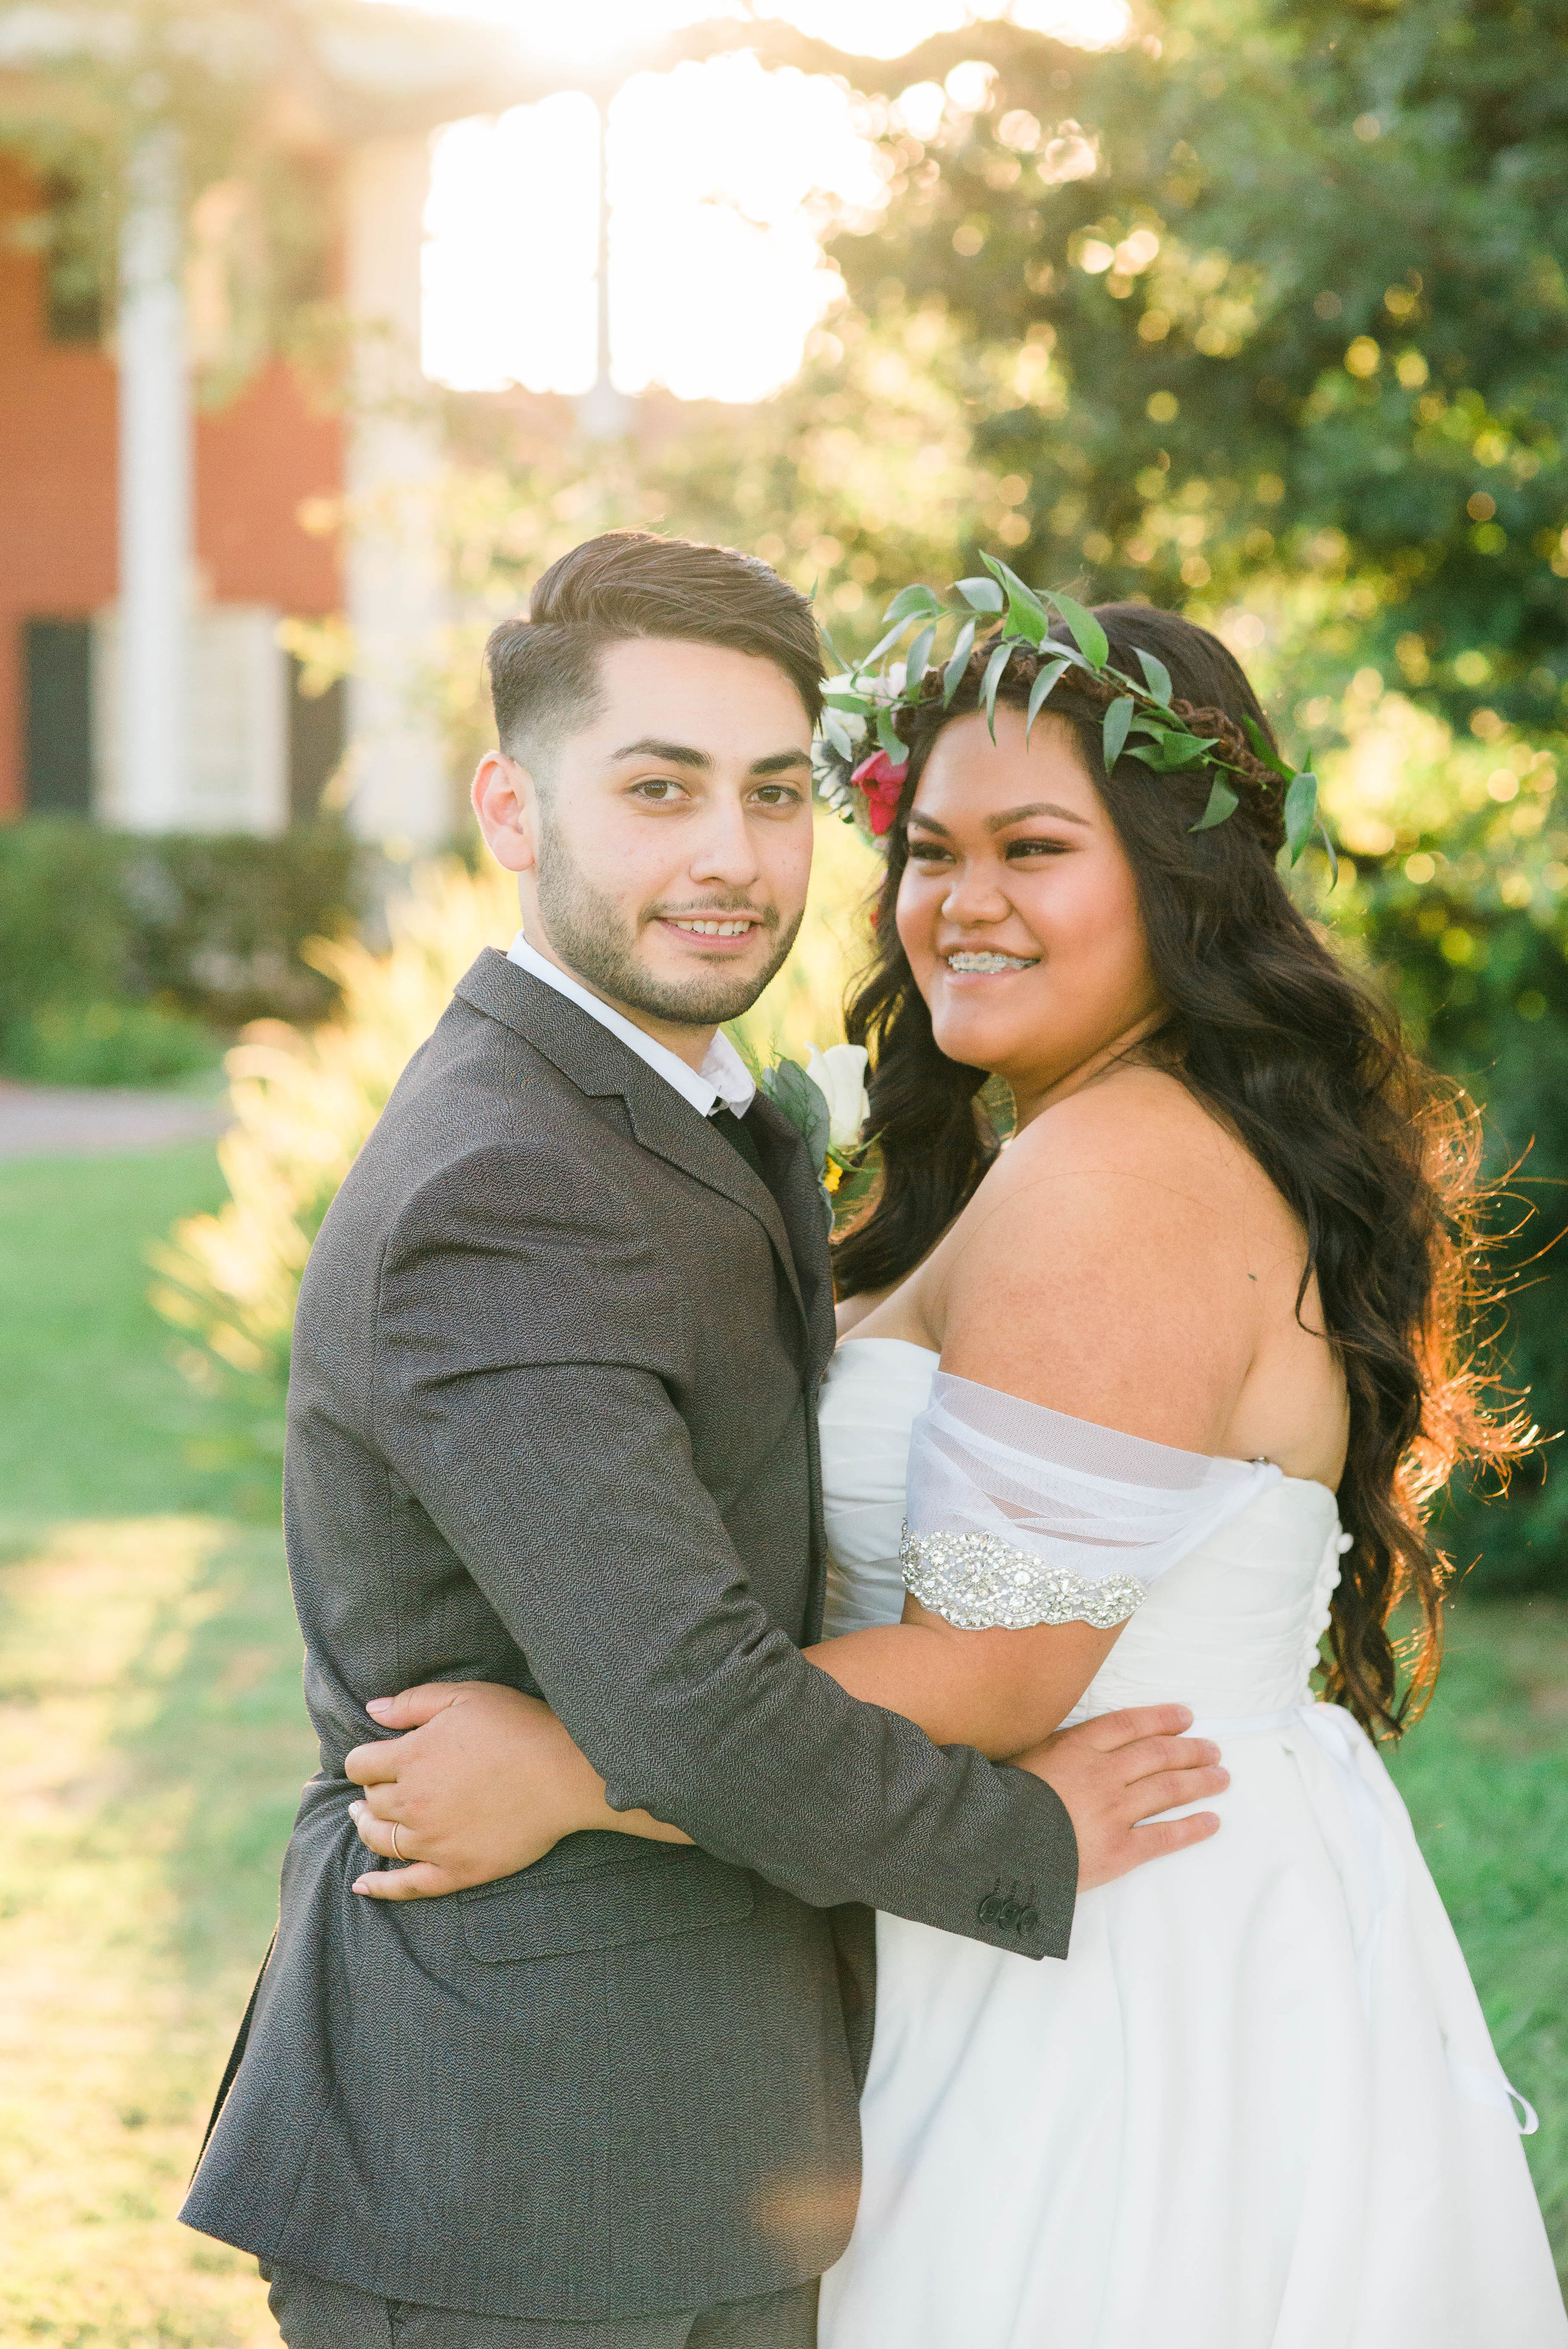 riverside-southern-california-wedding-photographer-ica-images-bride-and-groom-portraits5